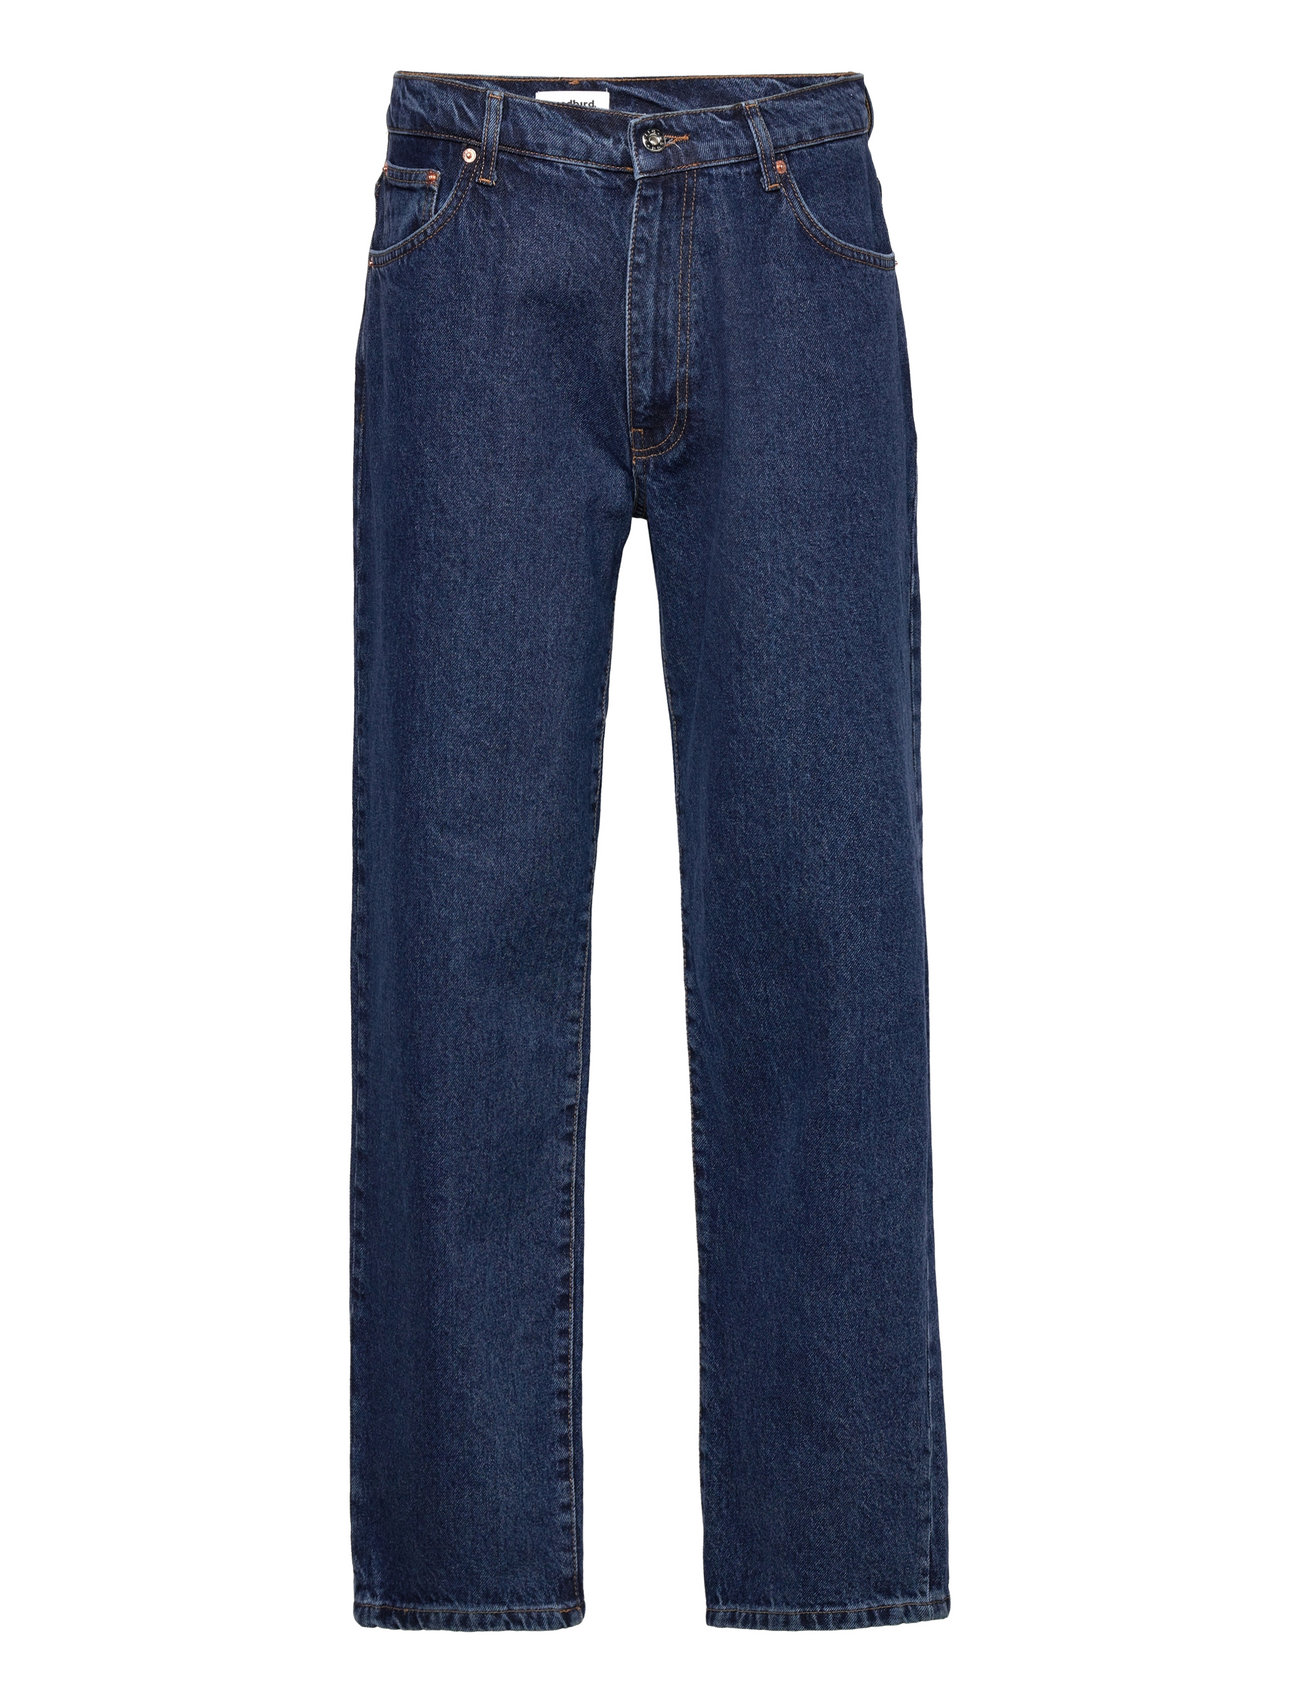 Woodbird Leroy 90s Rinse Jeans - Relaxed jeans | Boozt.com